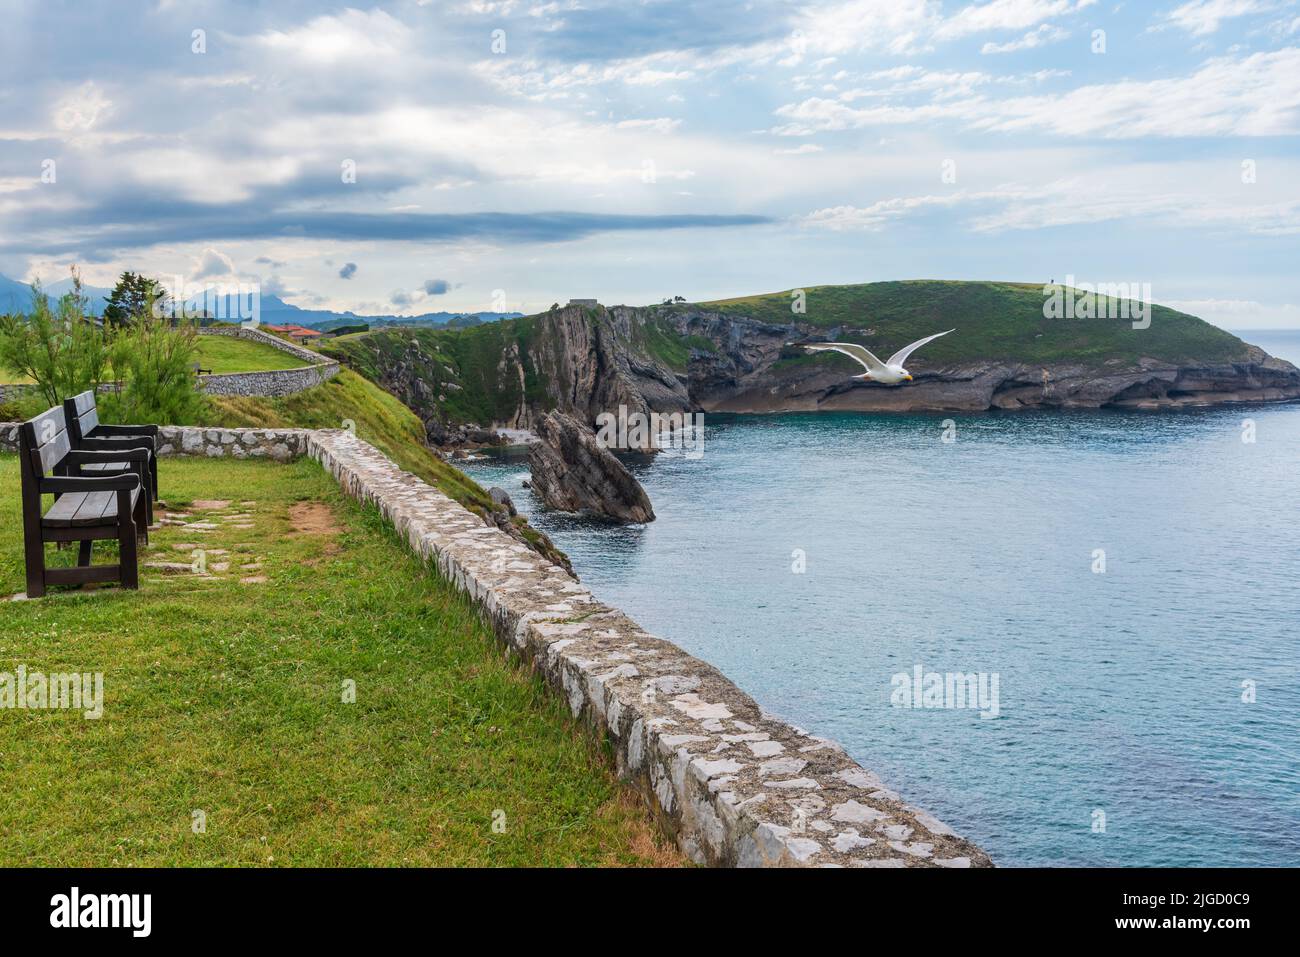 Bench on the Paseo de San Pedro, Llanes, overlooking the cliffs in the Cantabrian Sea. Stock Photo